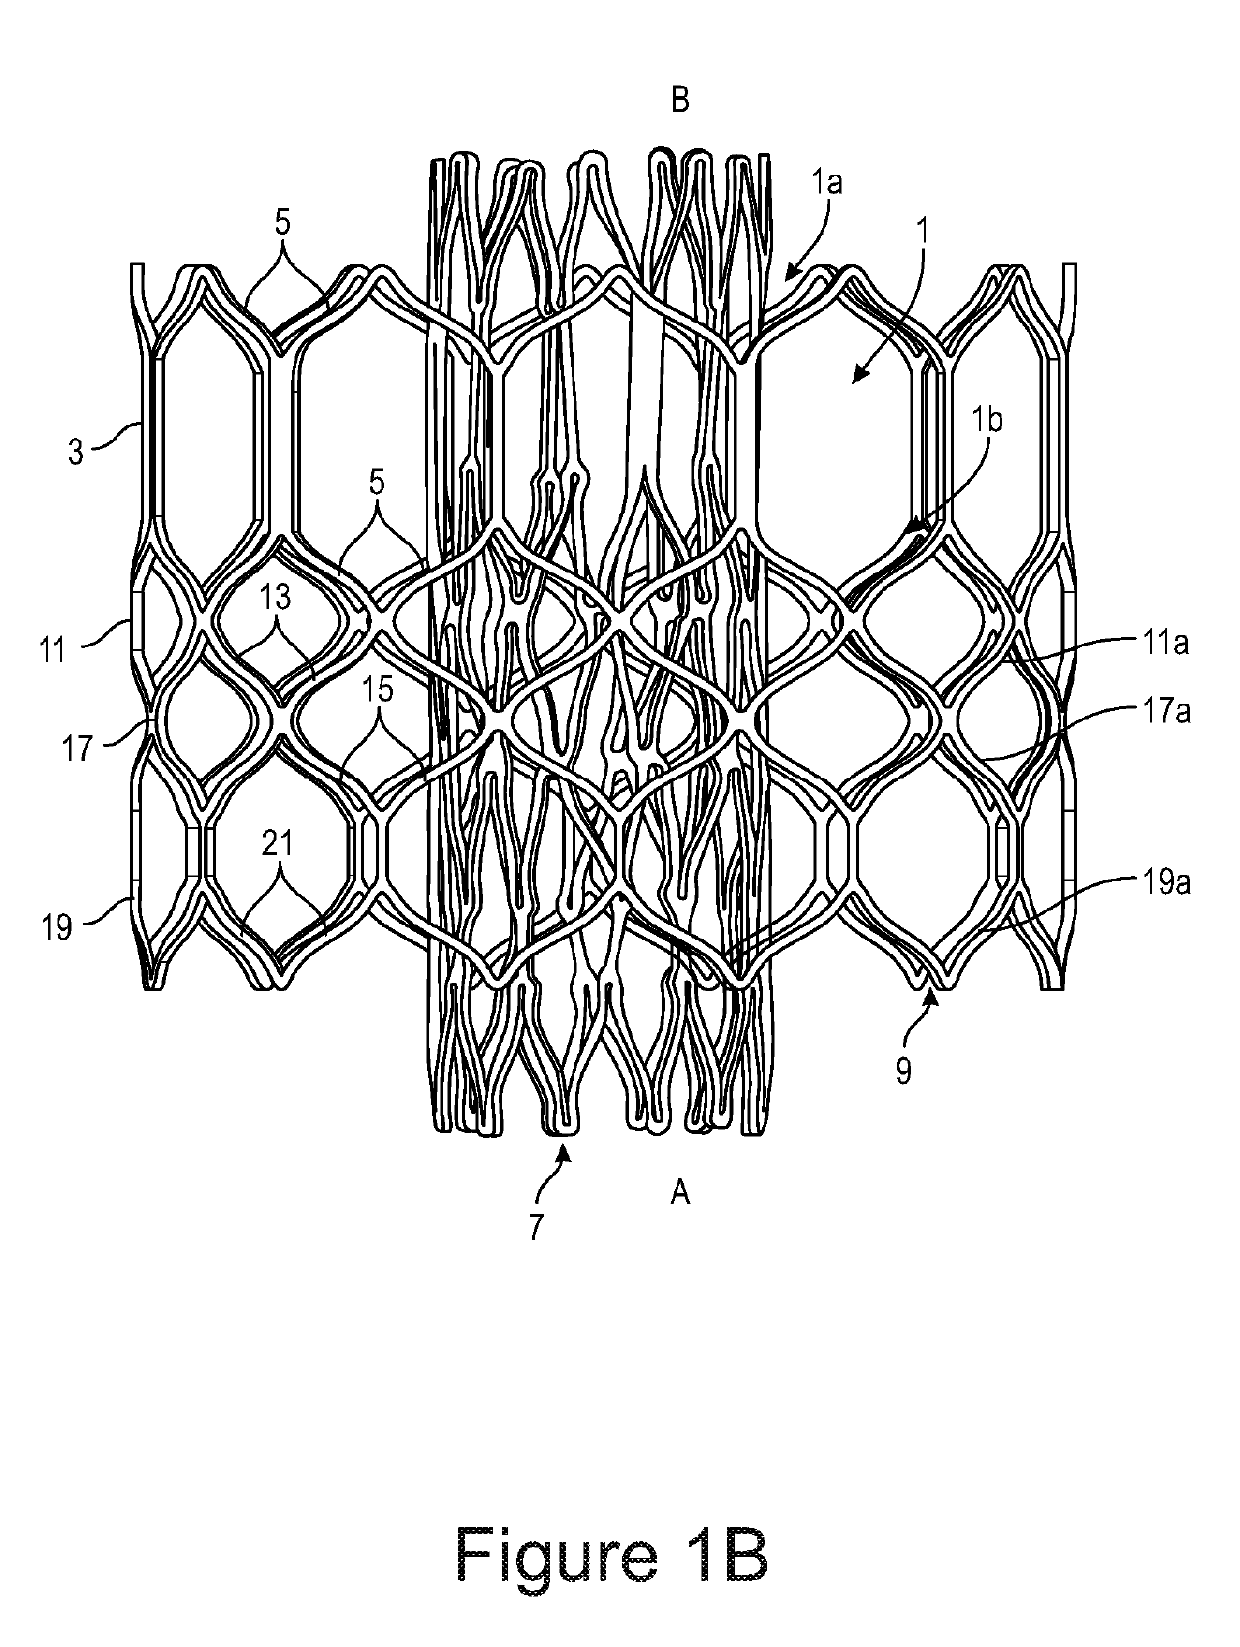 A frame for an implantable medical device and a method of manufacturing a frame for an implantable medical device